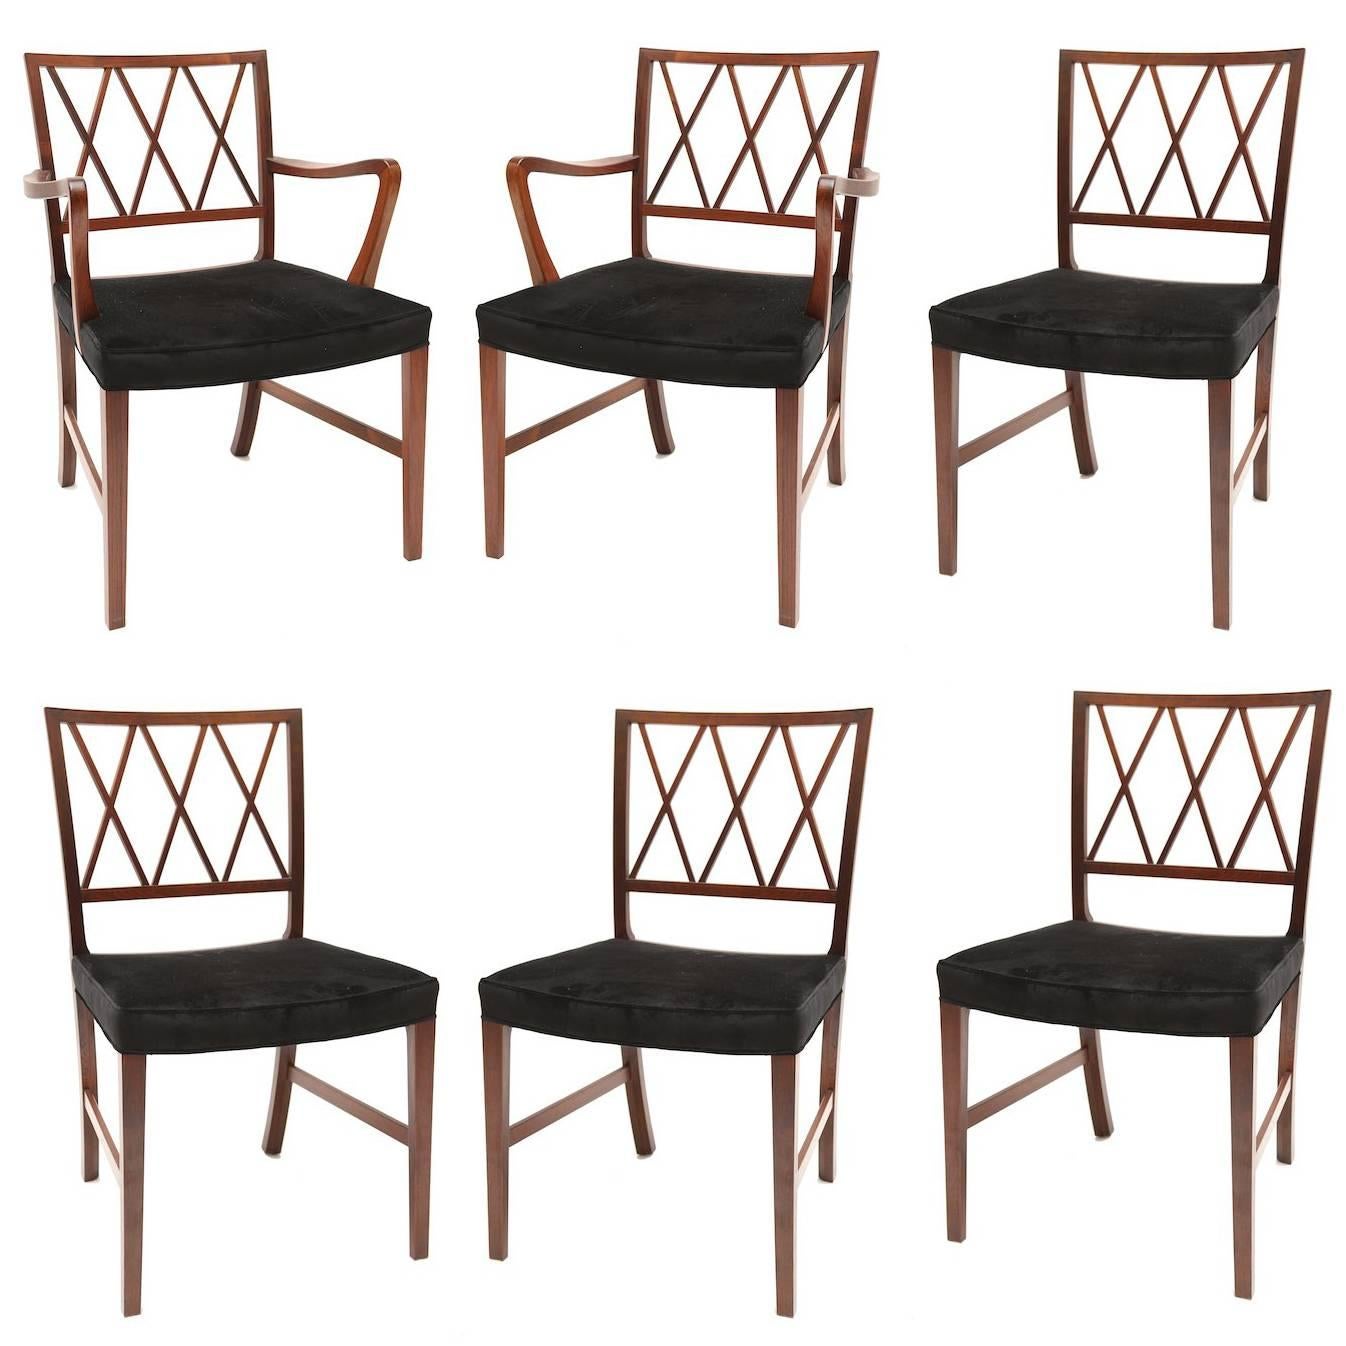 Ole Wanscher Dining Chairs for AJ Iverson Snedkermester